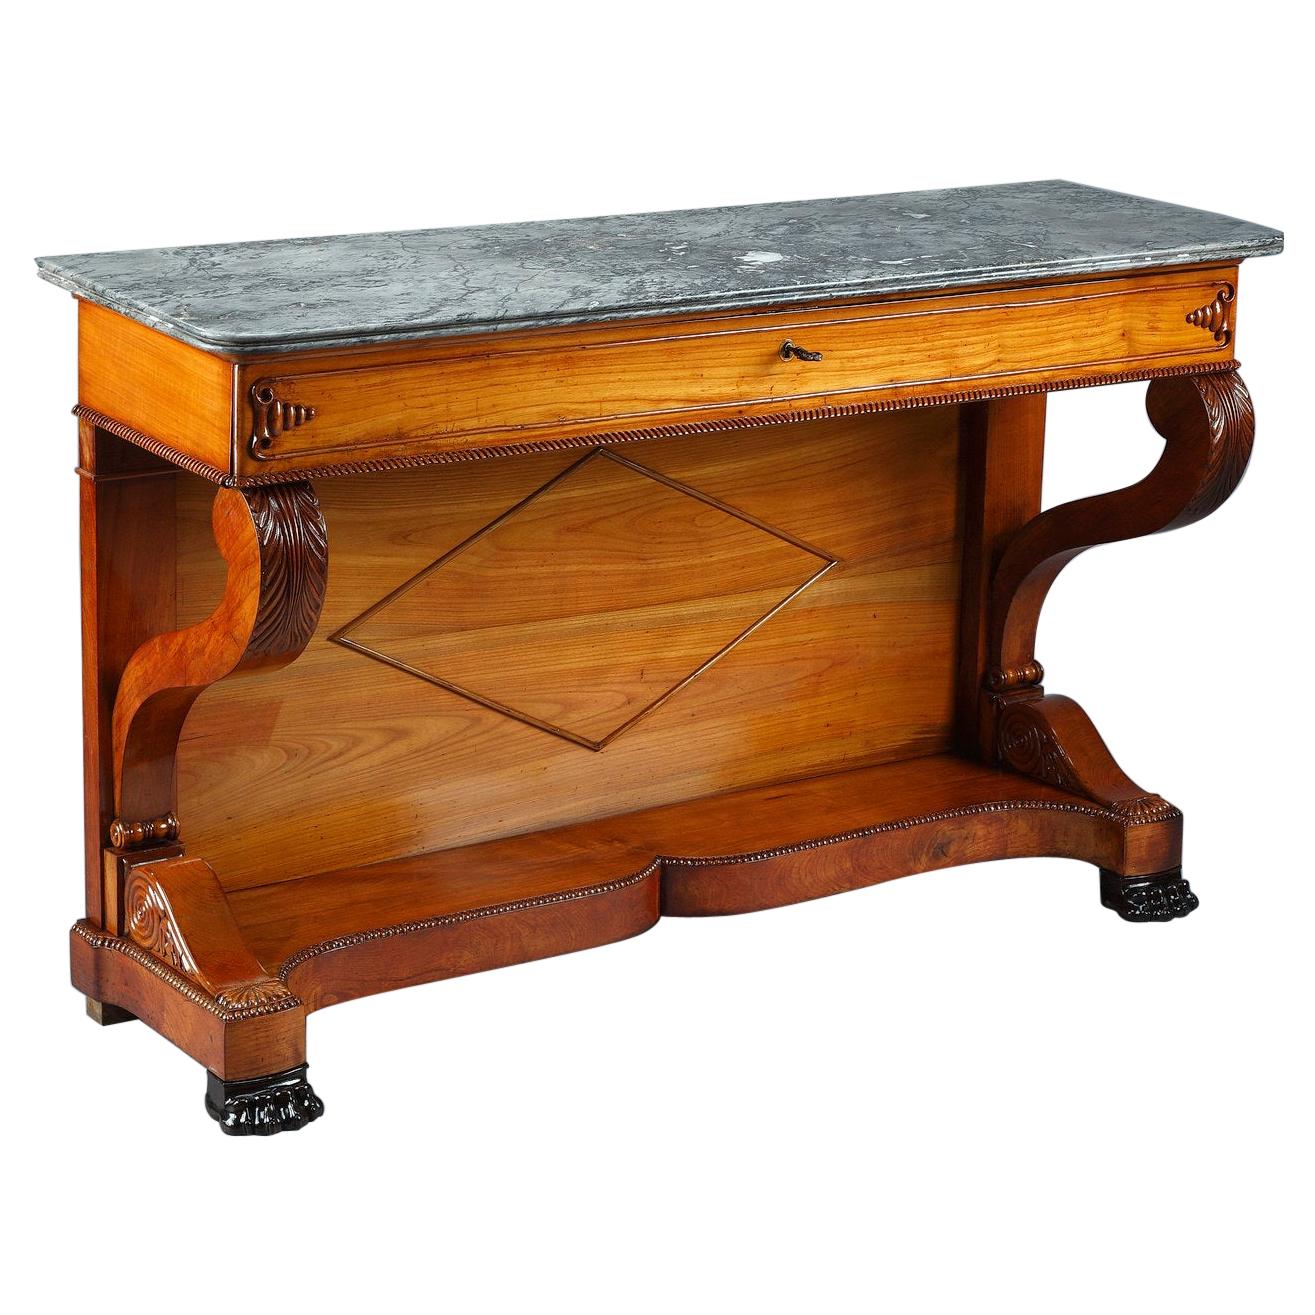 Large Cherry Wood Console, 19th Century